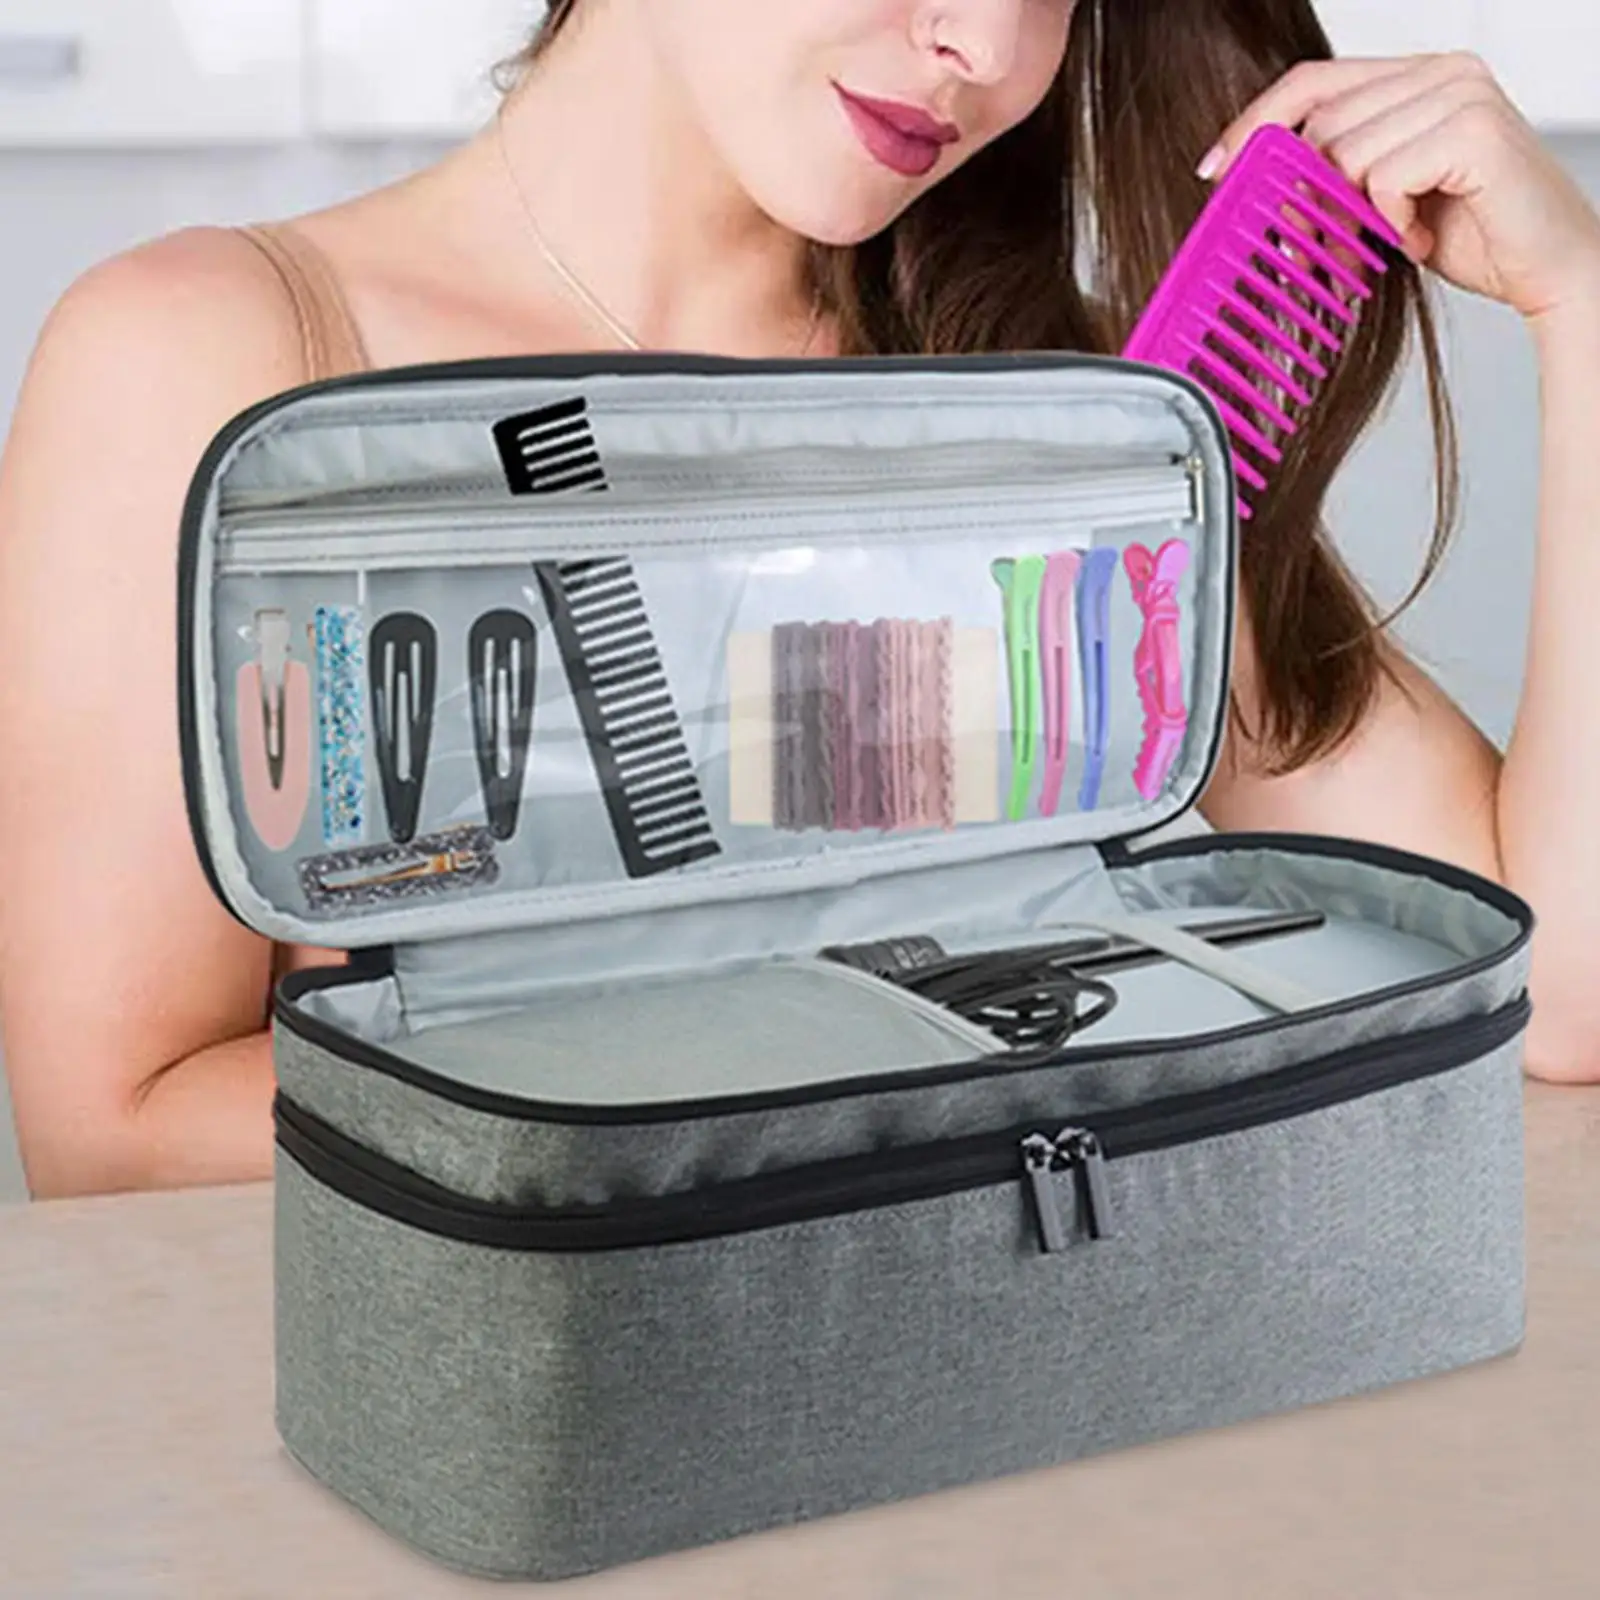 Portable Hair Dryer Bags Large Makeup Case Dustproof Protection Bag for Business Trip Home